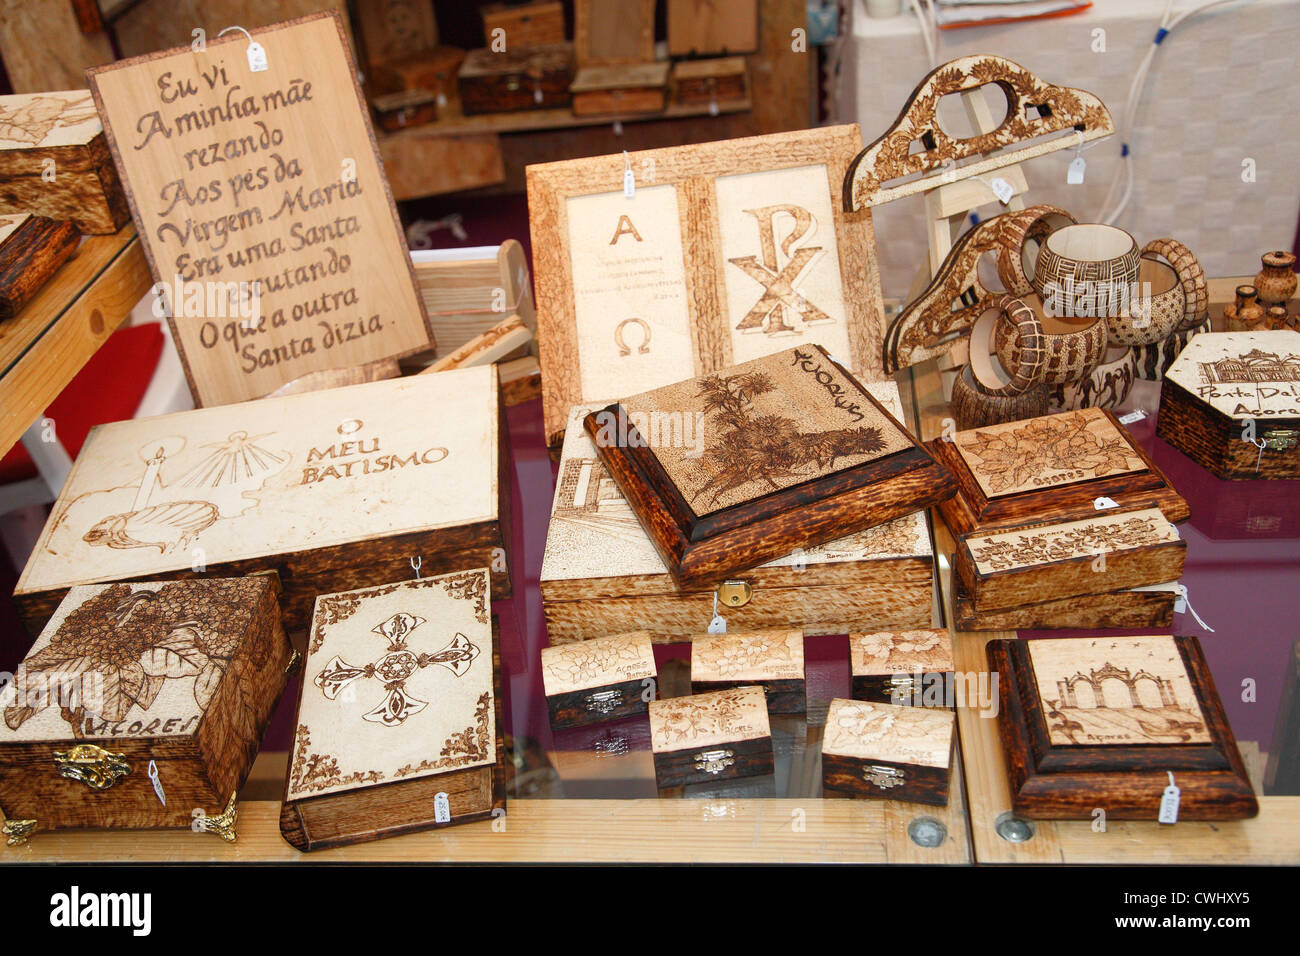 Pyrography items on display. Craftwork made in Sao Miguel island, Azores, Portugal. Stock Photo